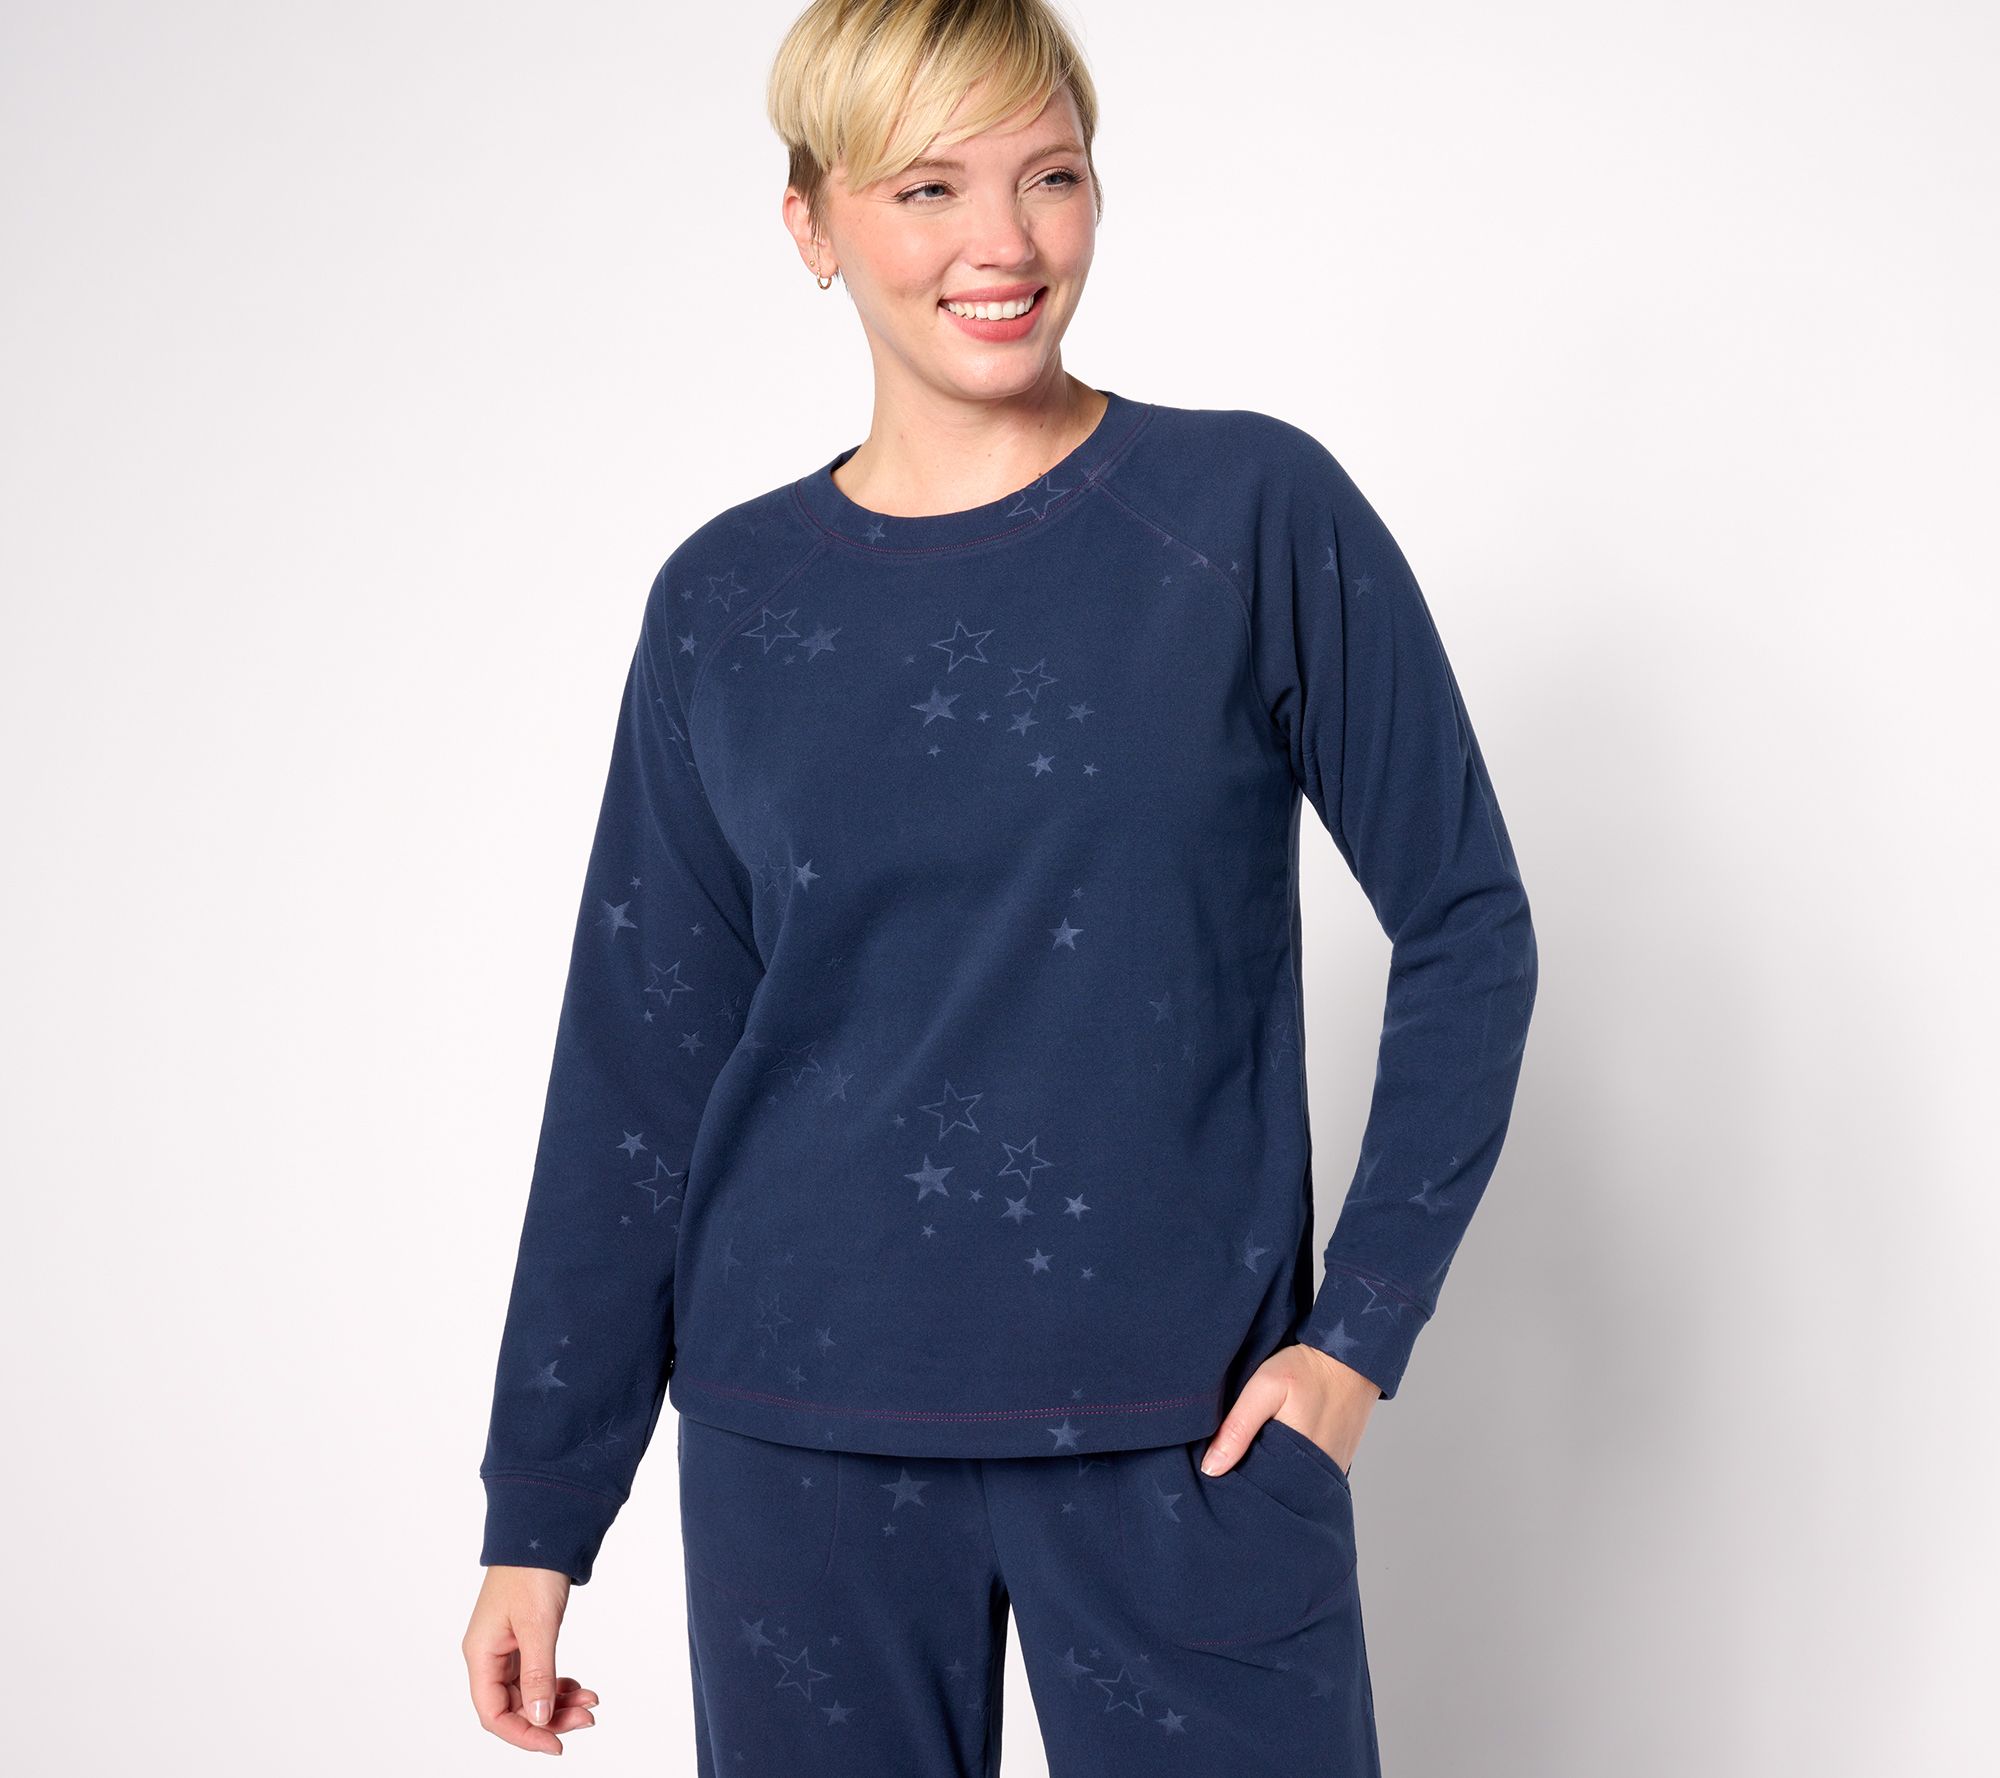 Cuddl Duds Fleecewear with Stretch Crew Neck Tops Set of Two Blue